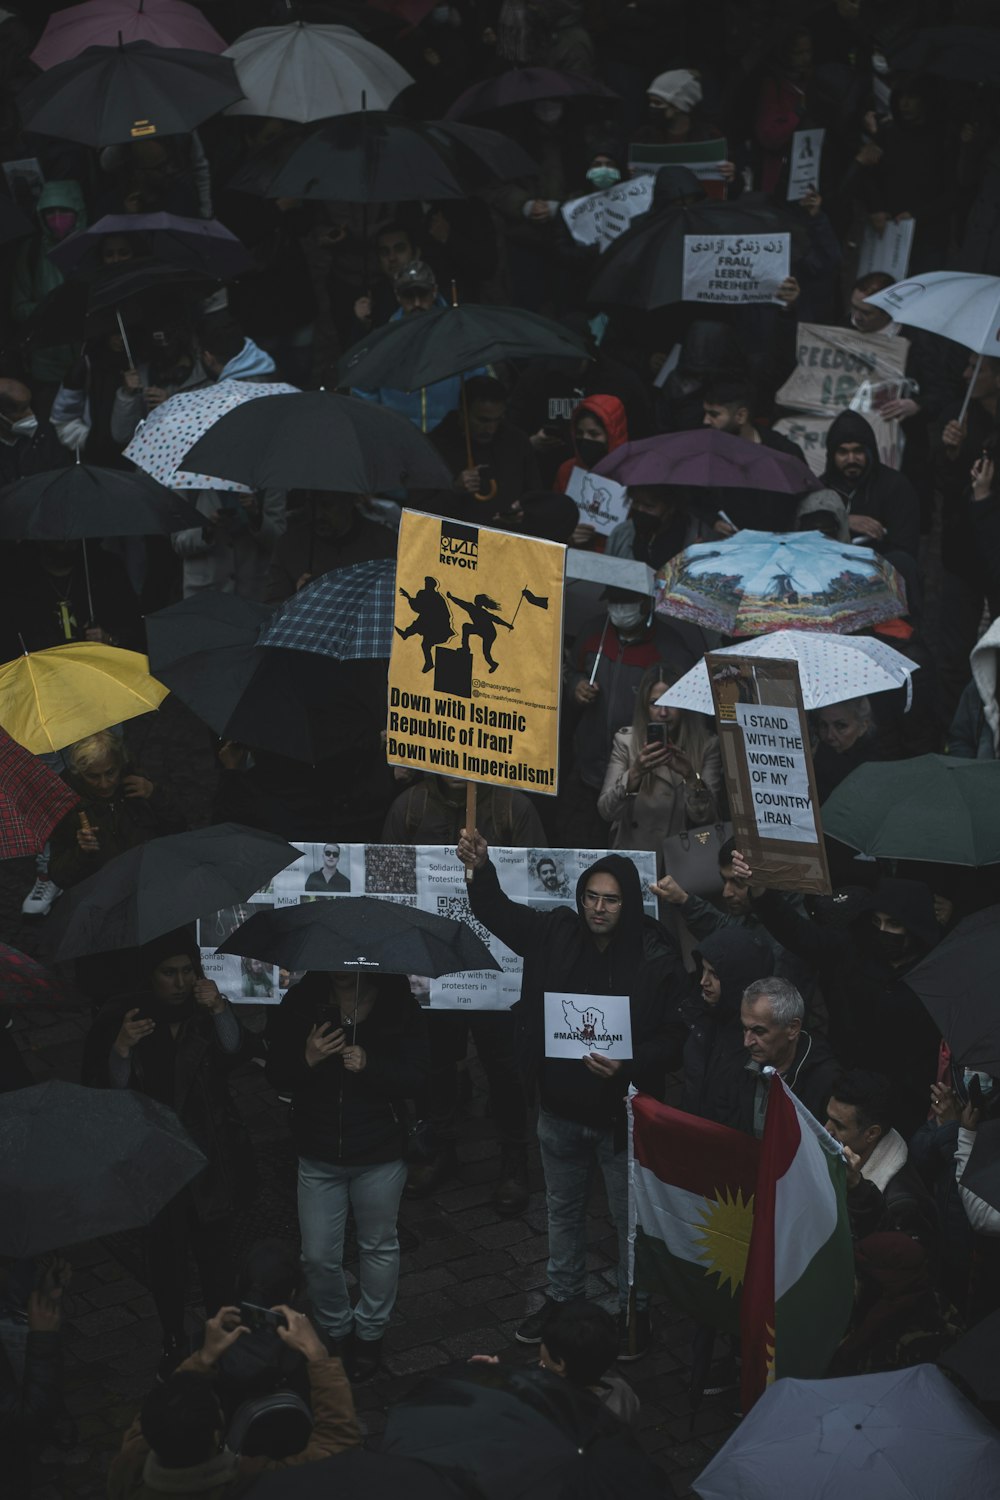 a group of people holding signs and umbrellas